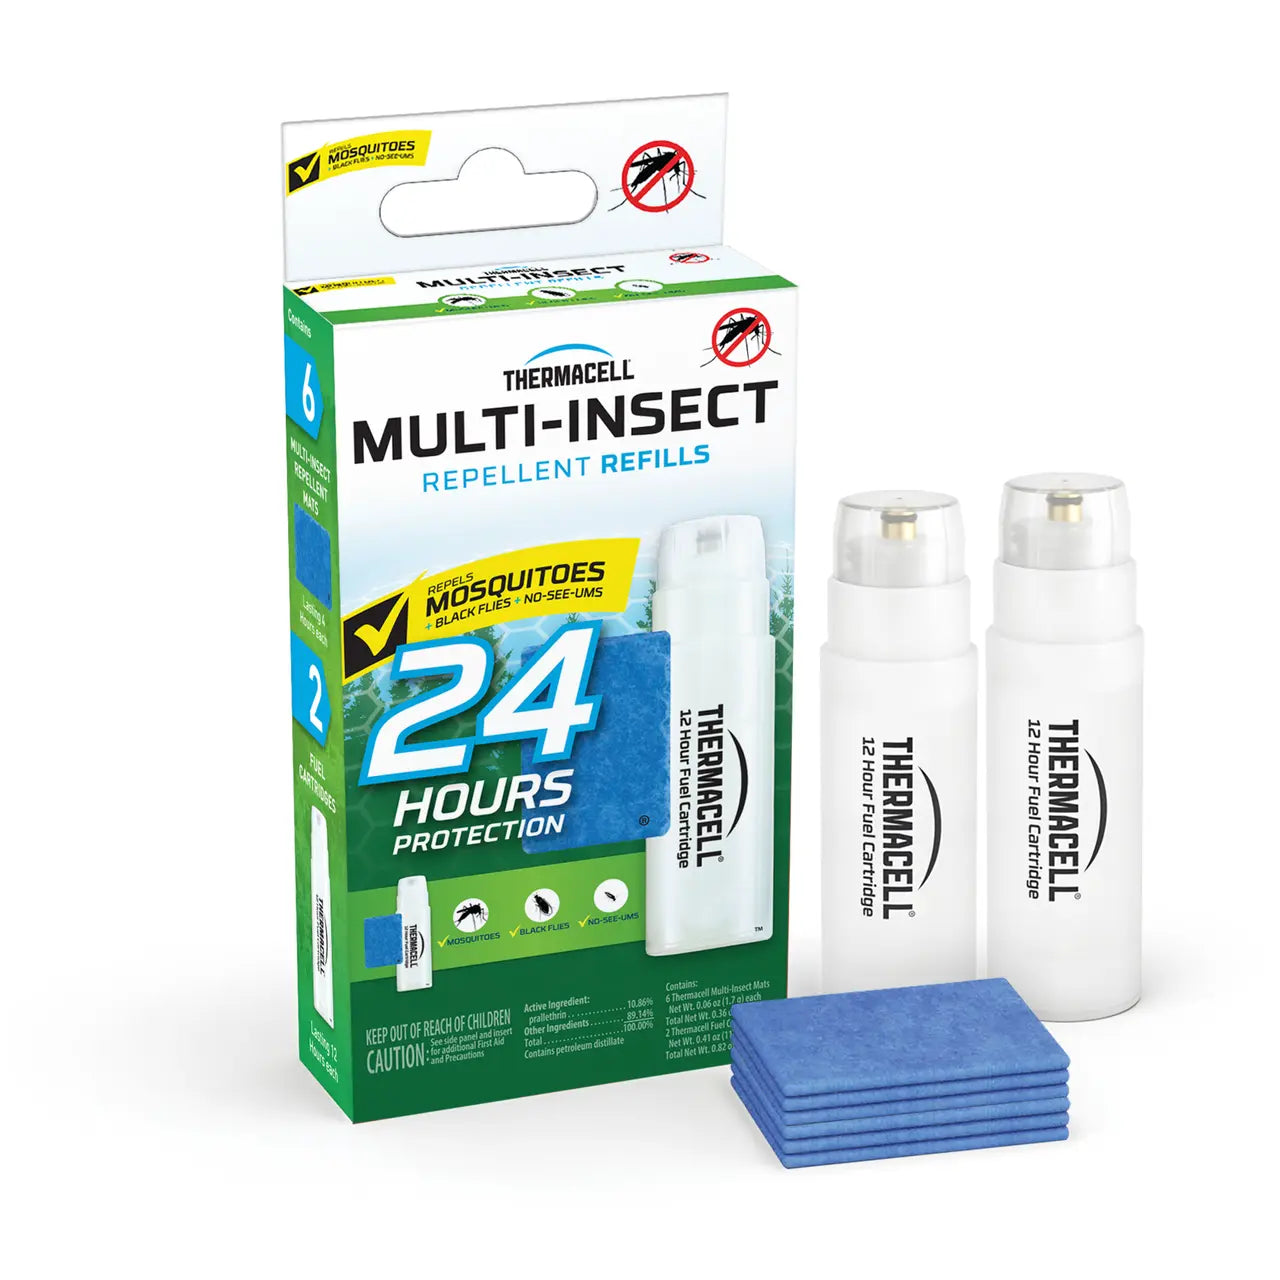 Thermacell Multi-Insect Repellent Refills